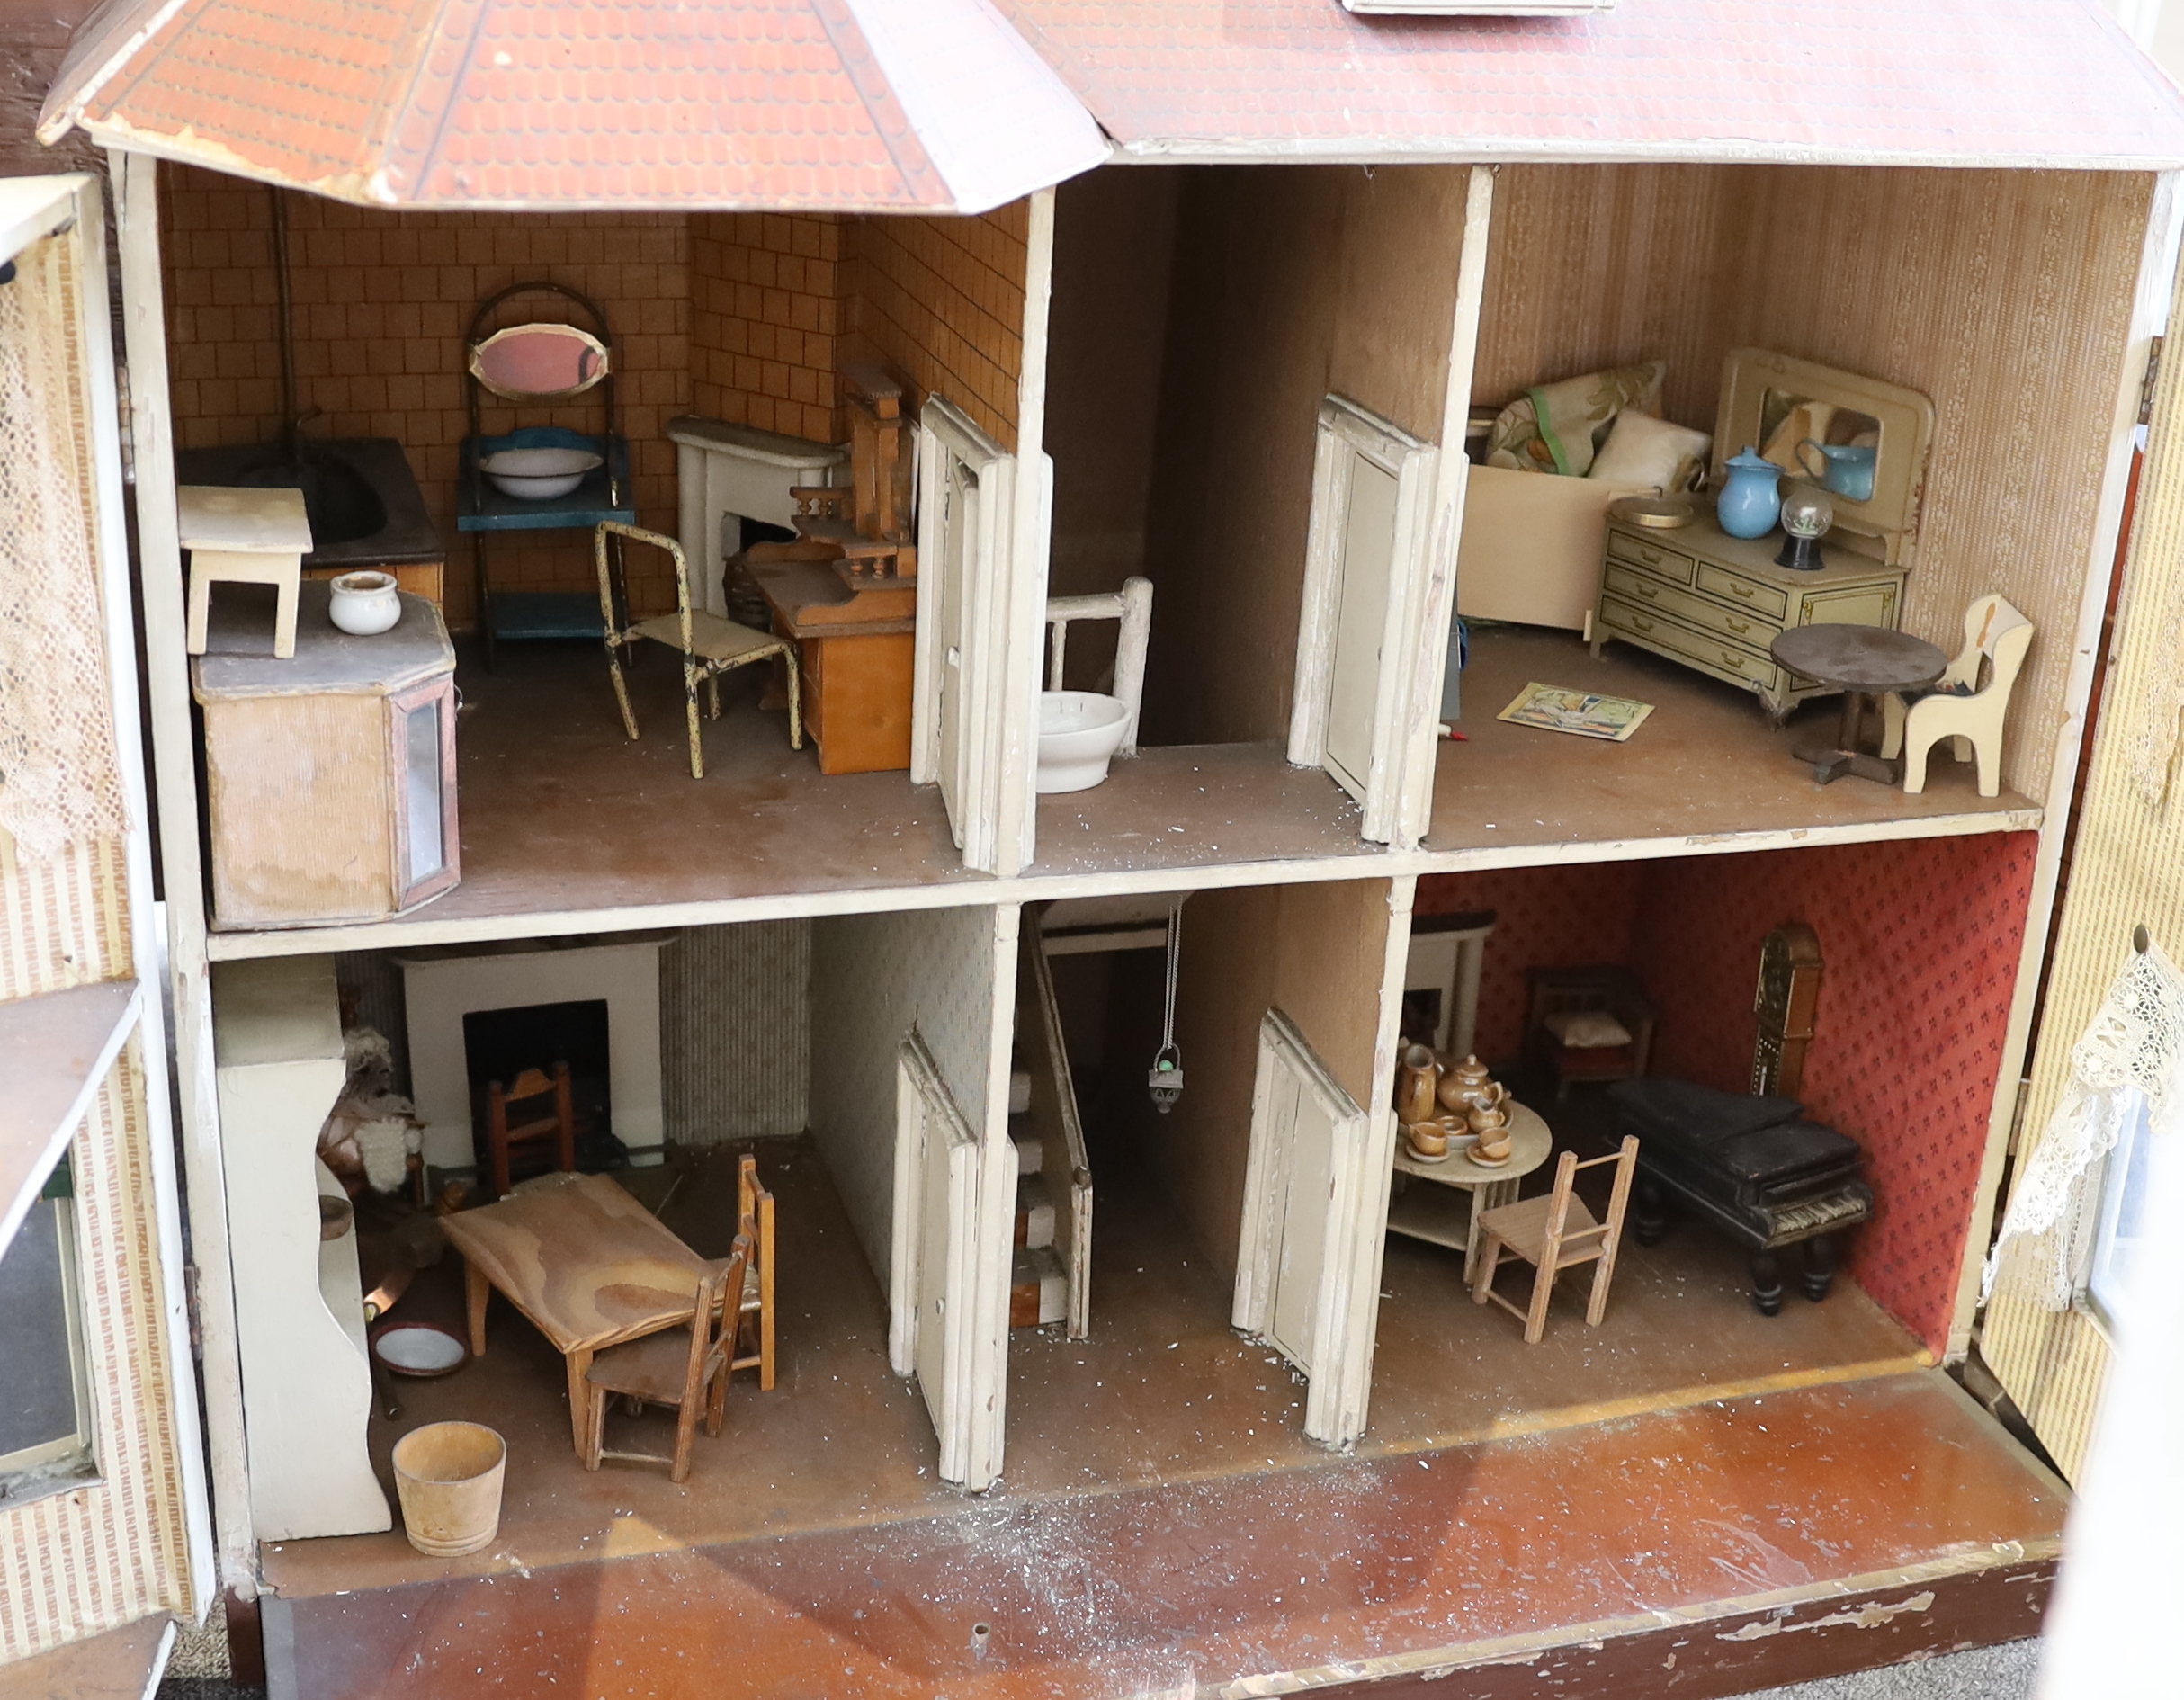 A G. and J. Lines furnished dolls’ house of 'Kits Koty' type, early 20th century, modelled as a - Image 3 of 8